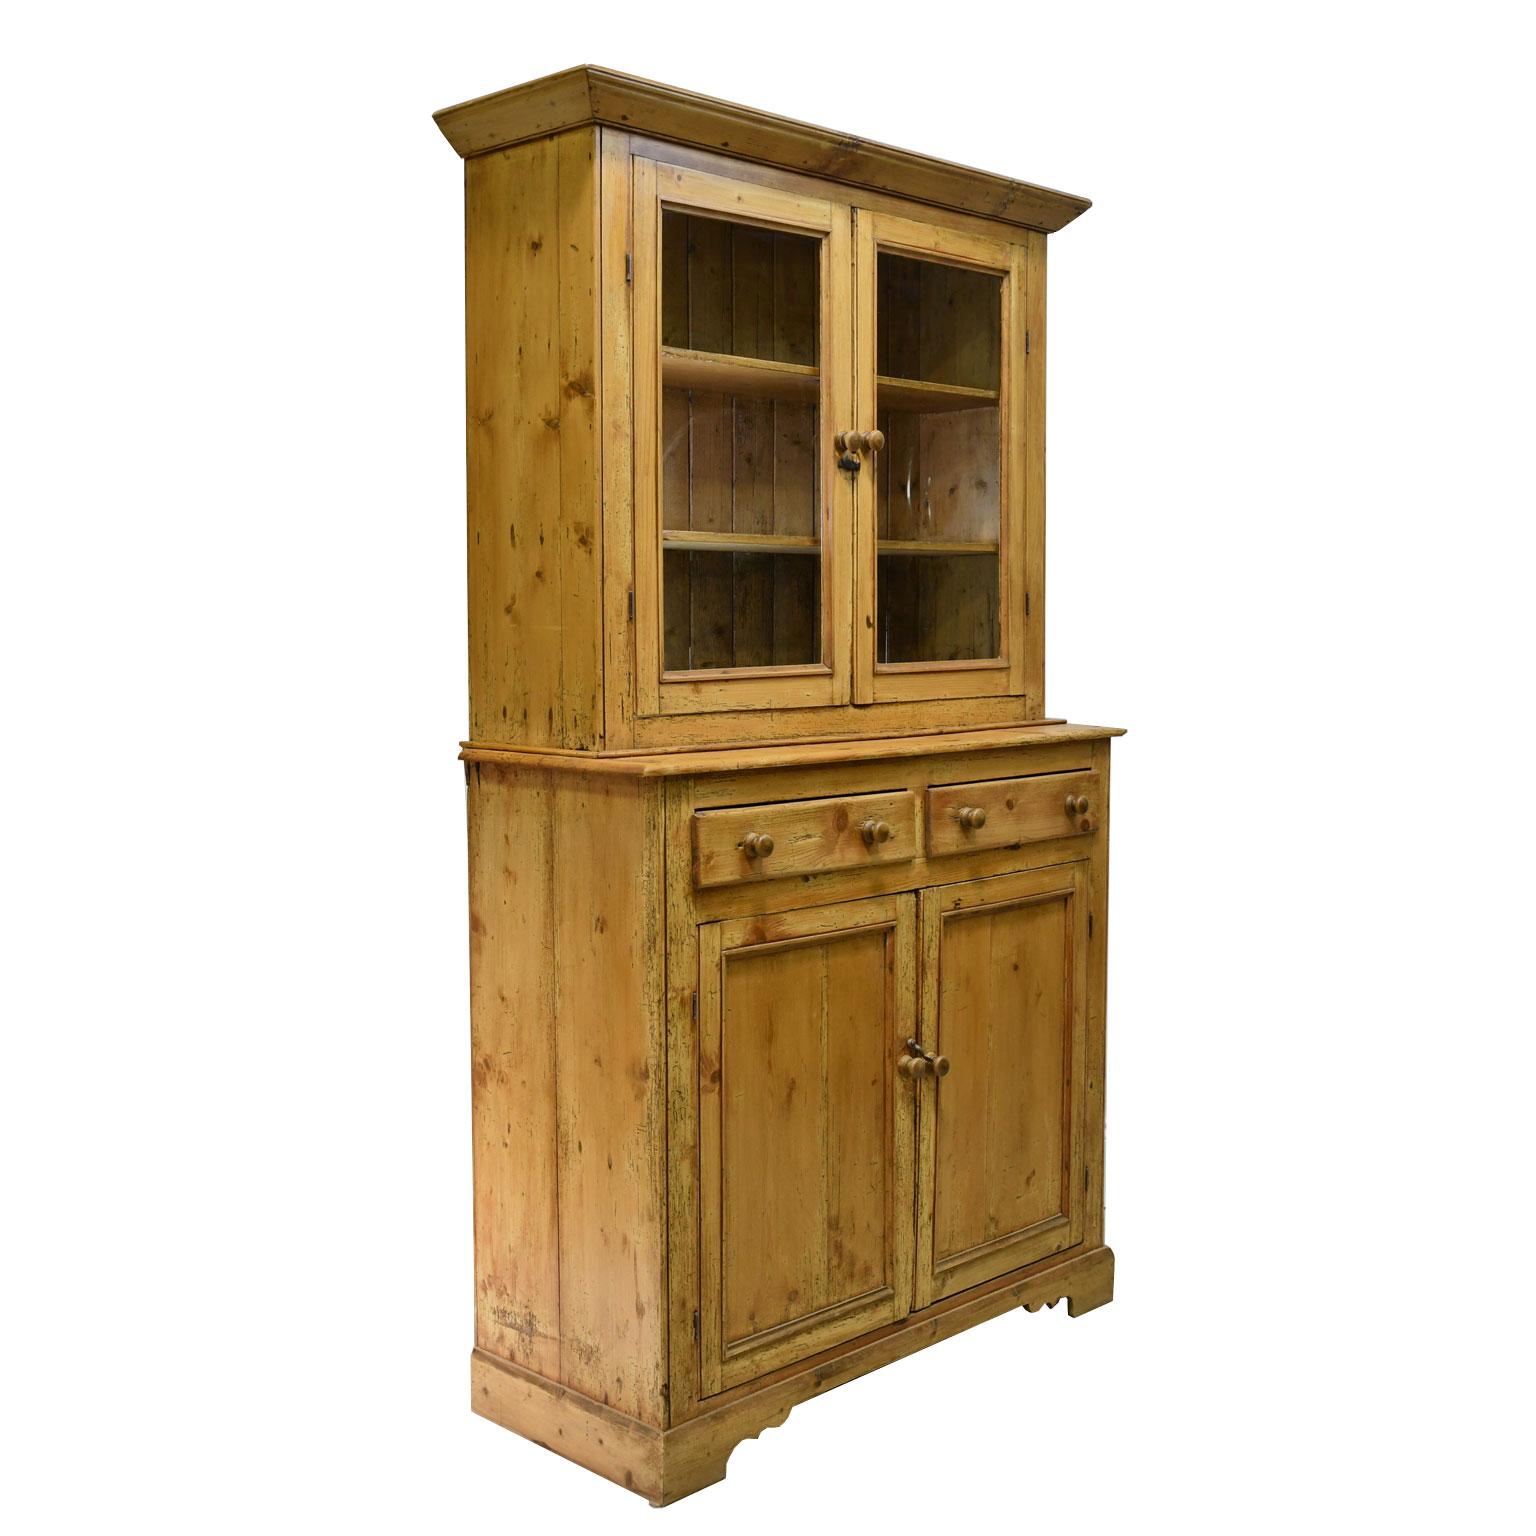 Rustic 19th Century English Country Cupboard in Pine with Glazed Doors 3